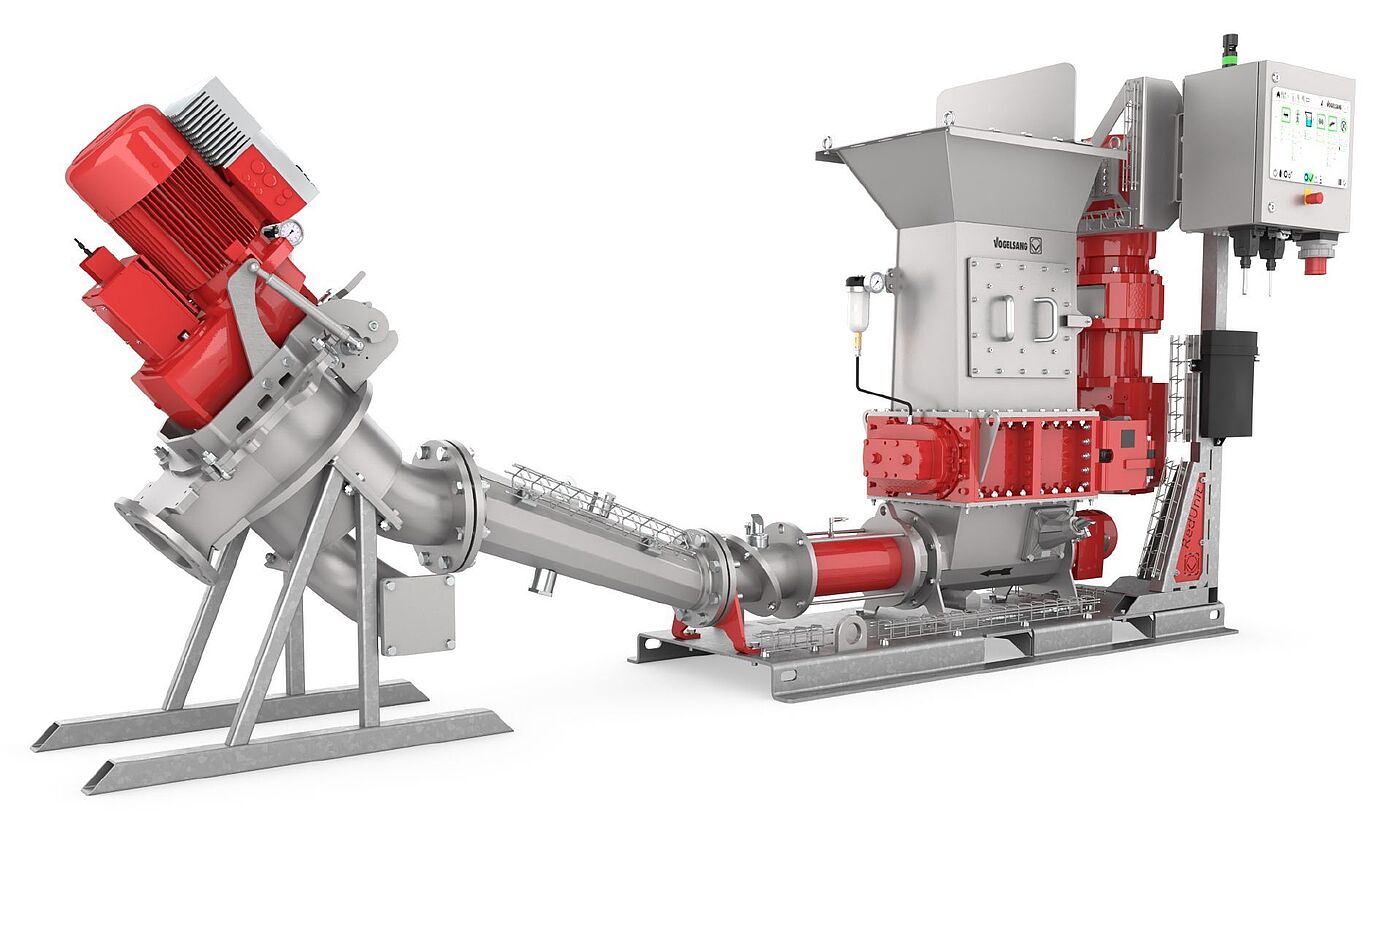 The solid matter grinder RedUnit combines grinding and pumping technology